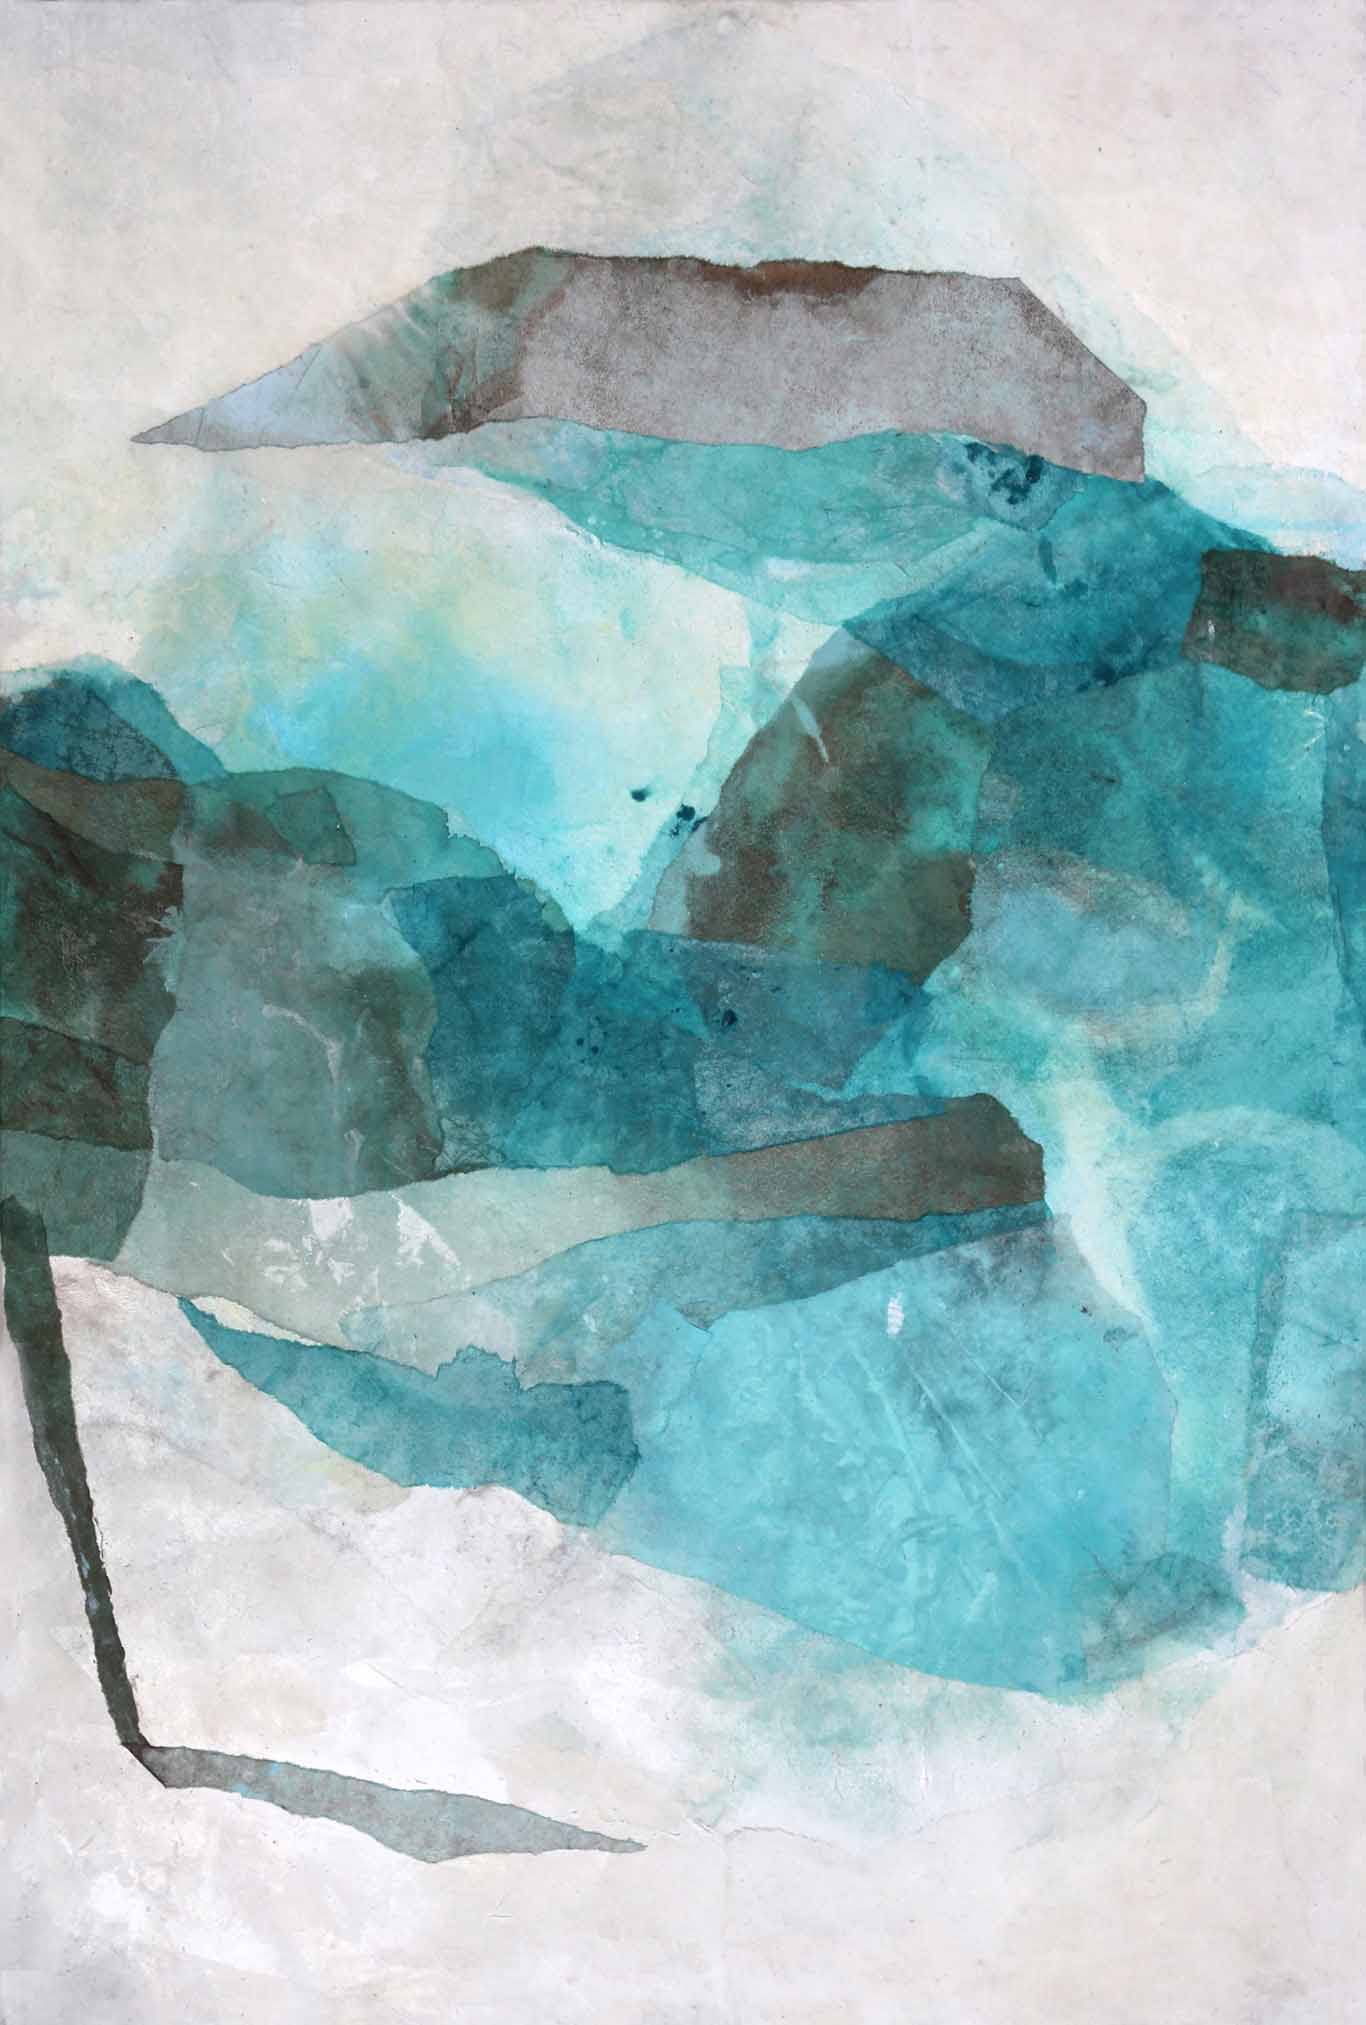 Abstract collage made of china paper in turquoise and emerald tones in medium format